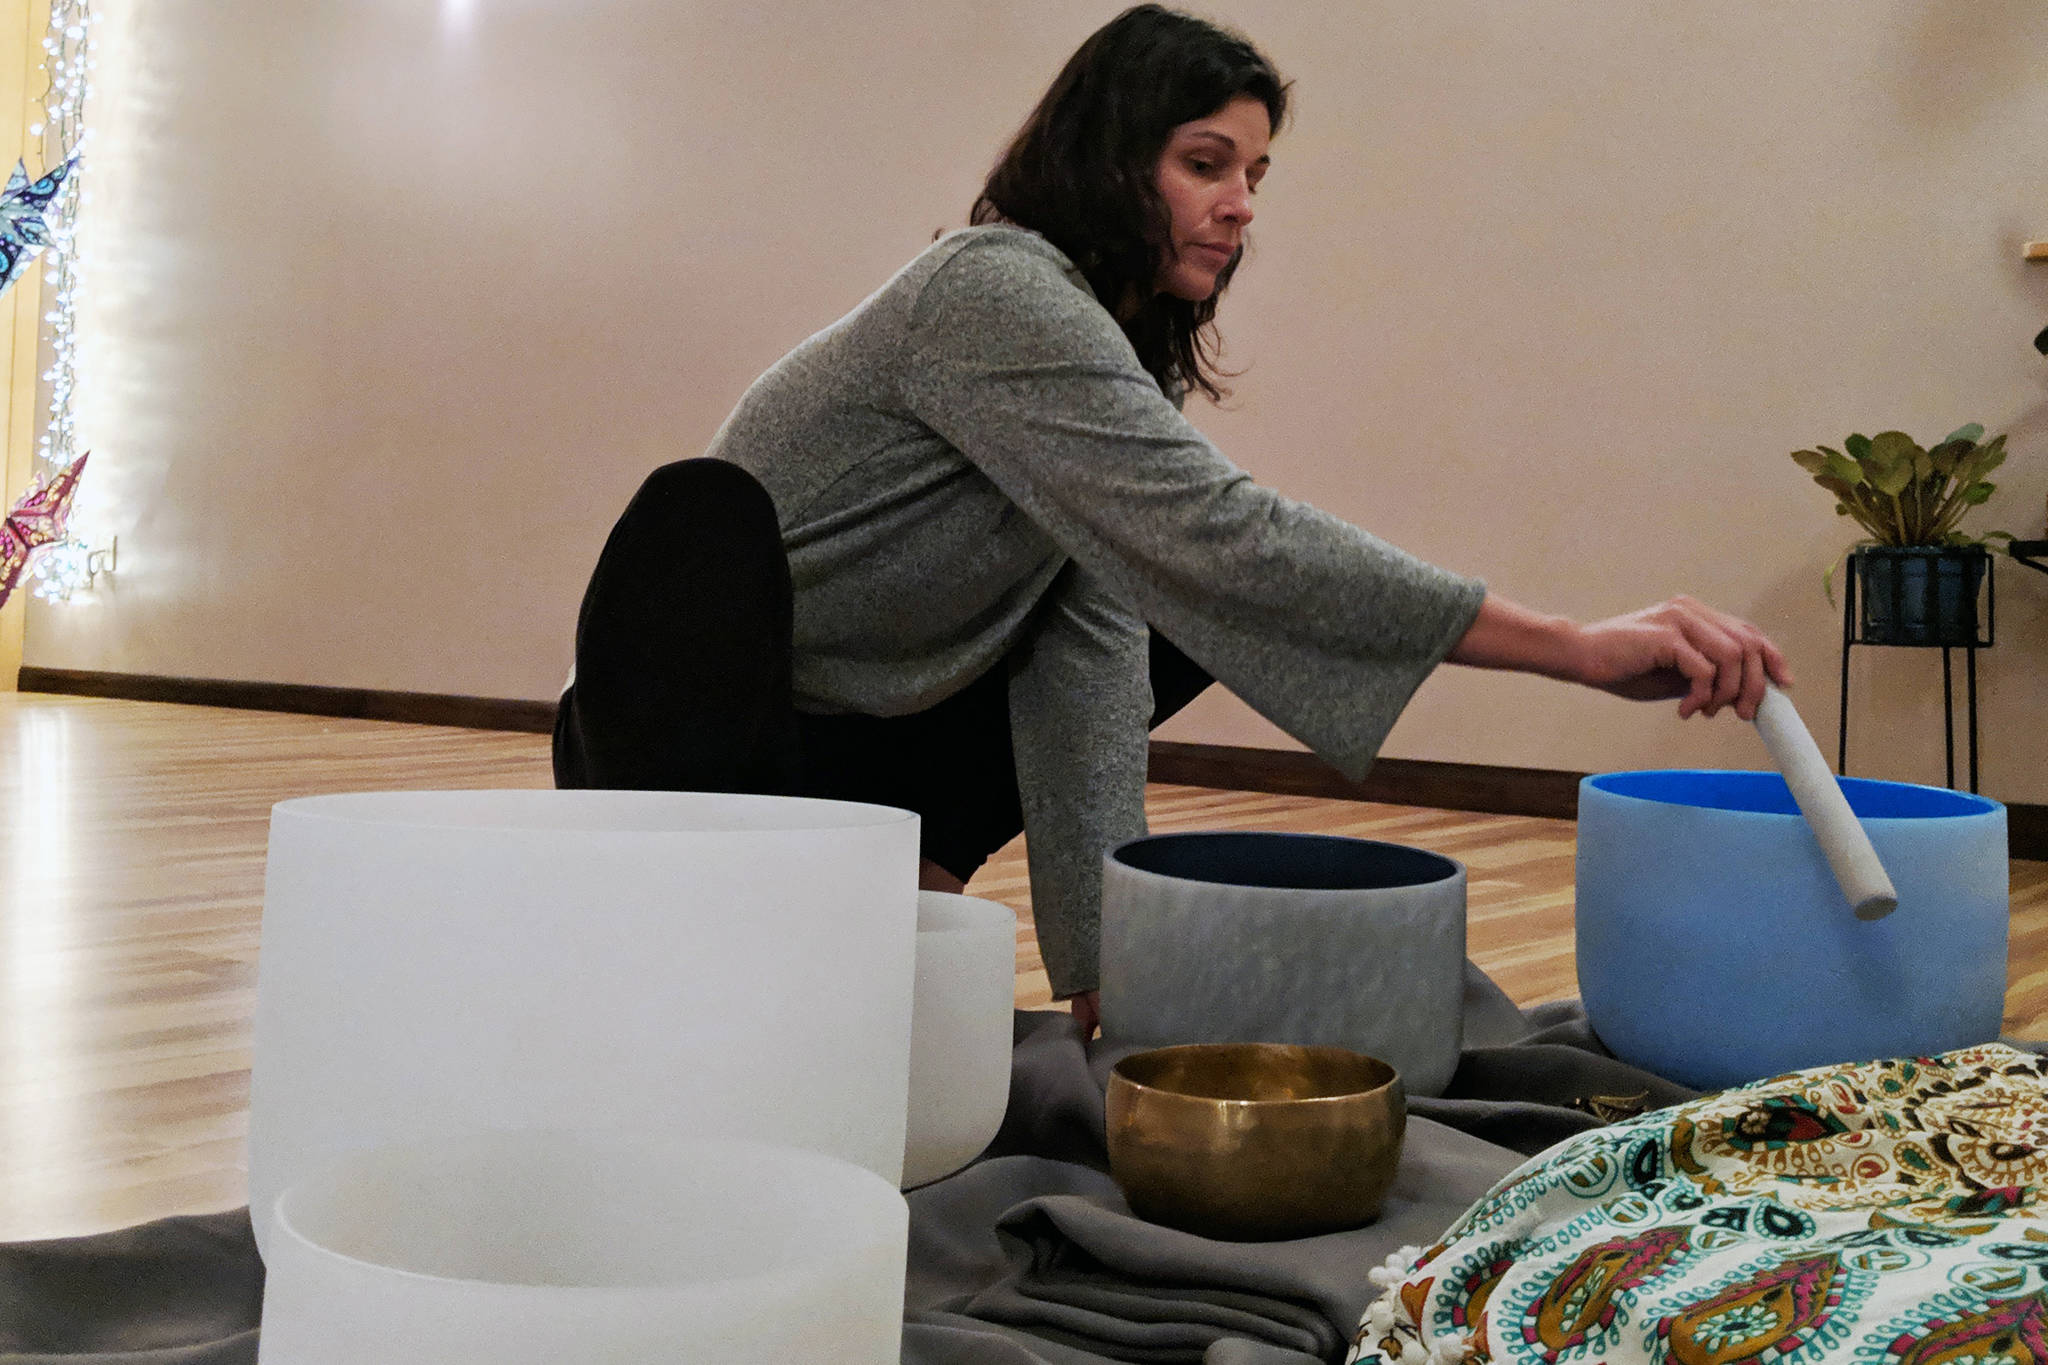 Lindsay Foreman, who lead a winter solstice sound bath at The Yoga Path, runs a foam wand around the rim of a singing bowl before the Dec. 21, 2018 event.